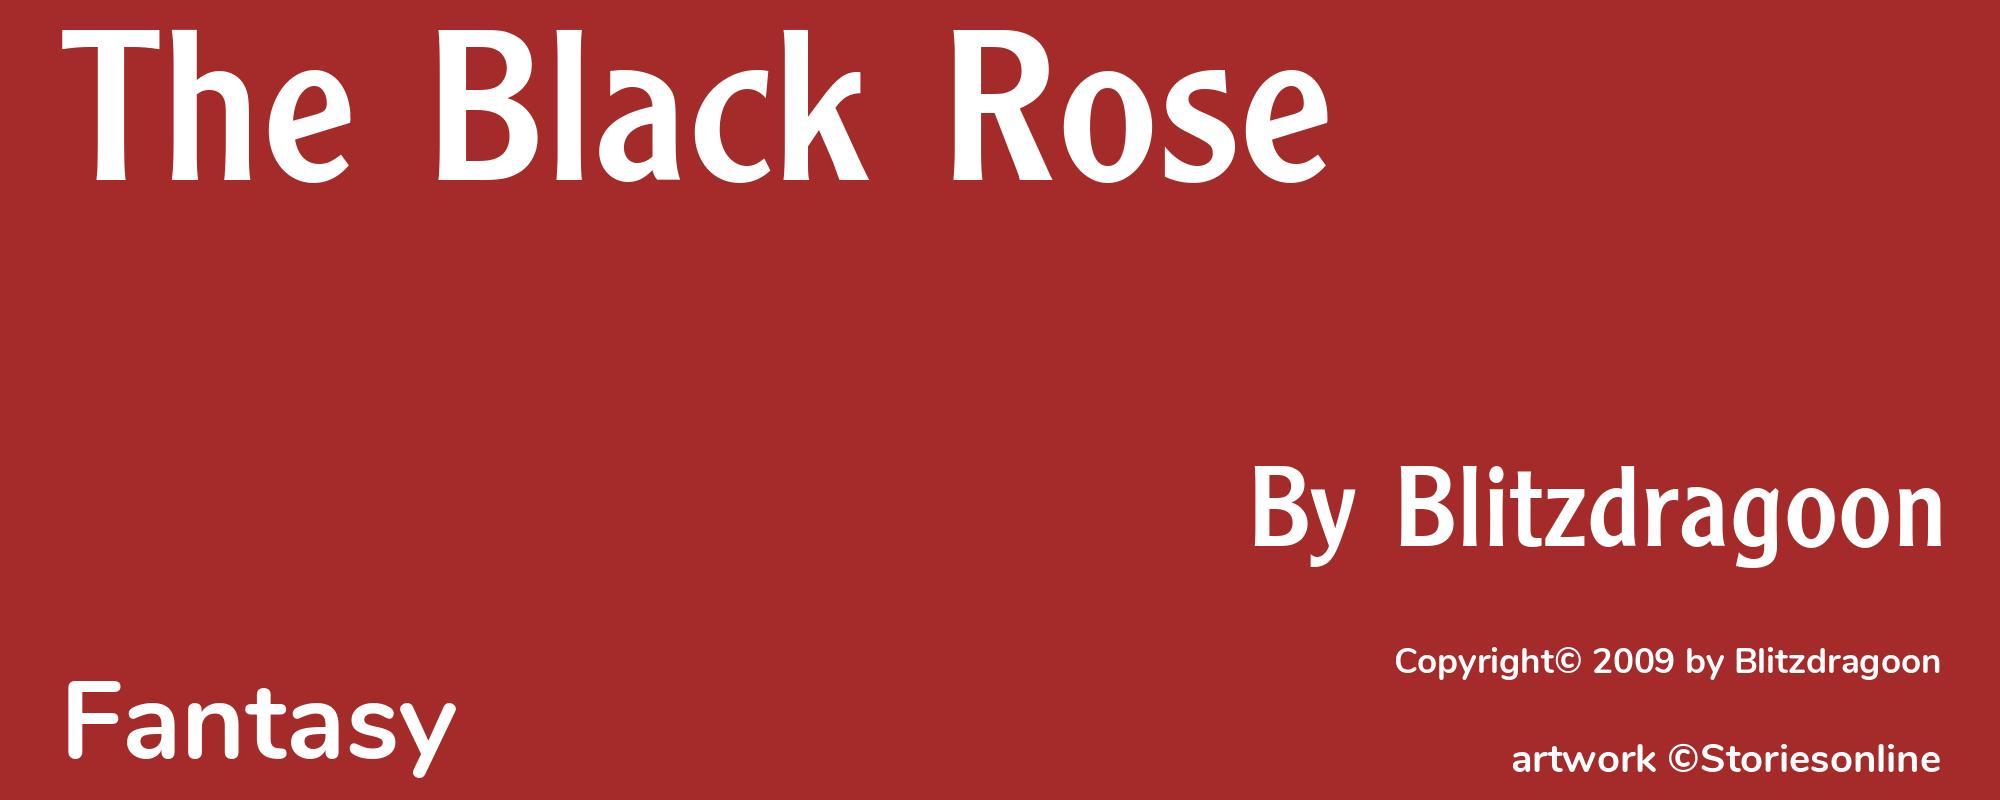 The Black Rose - Cover